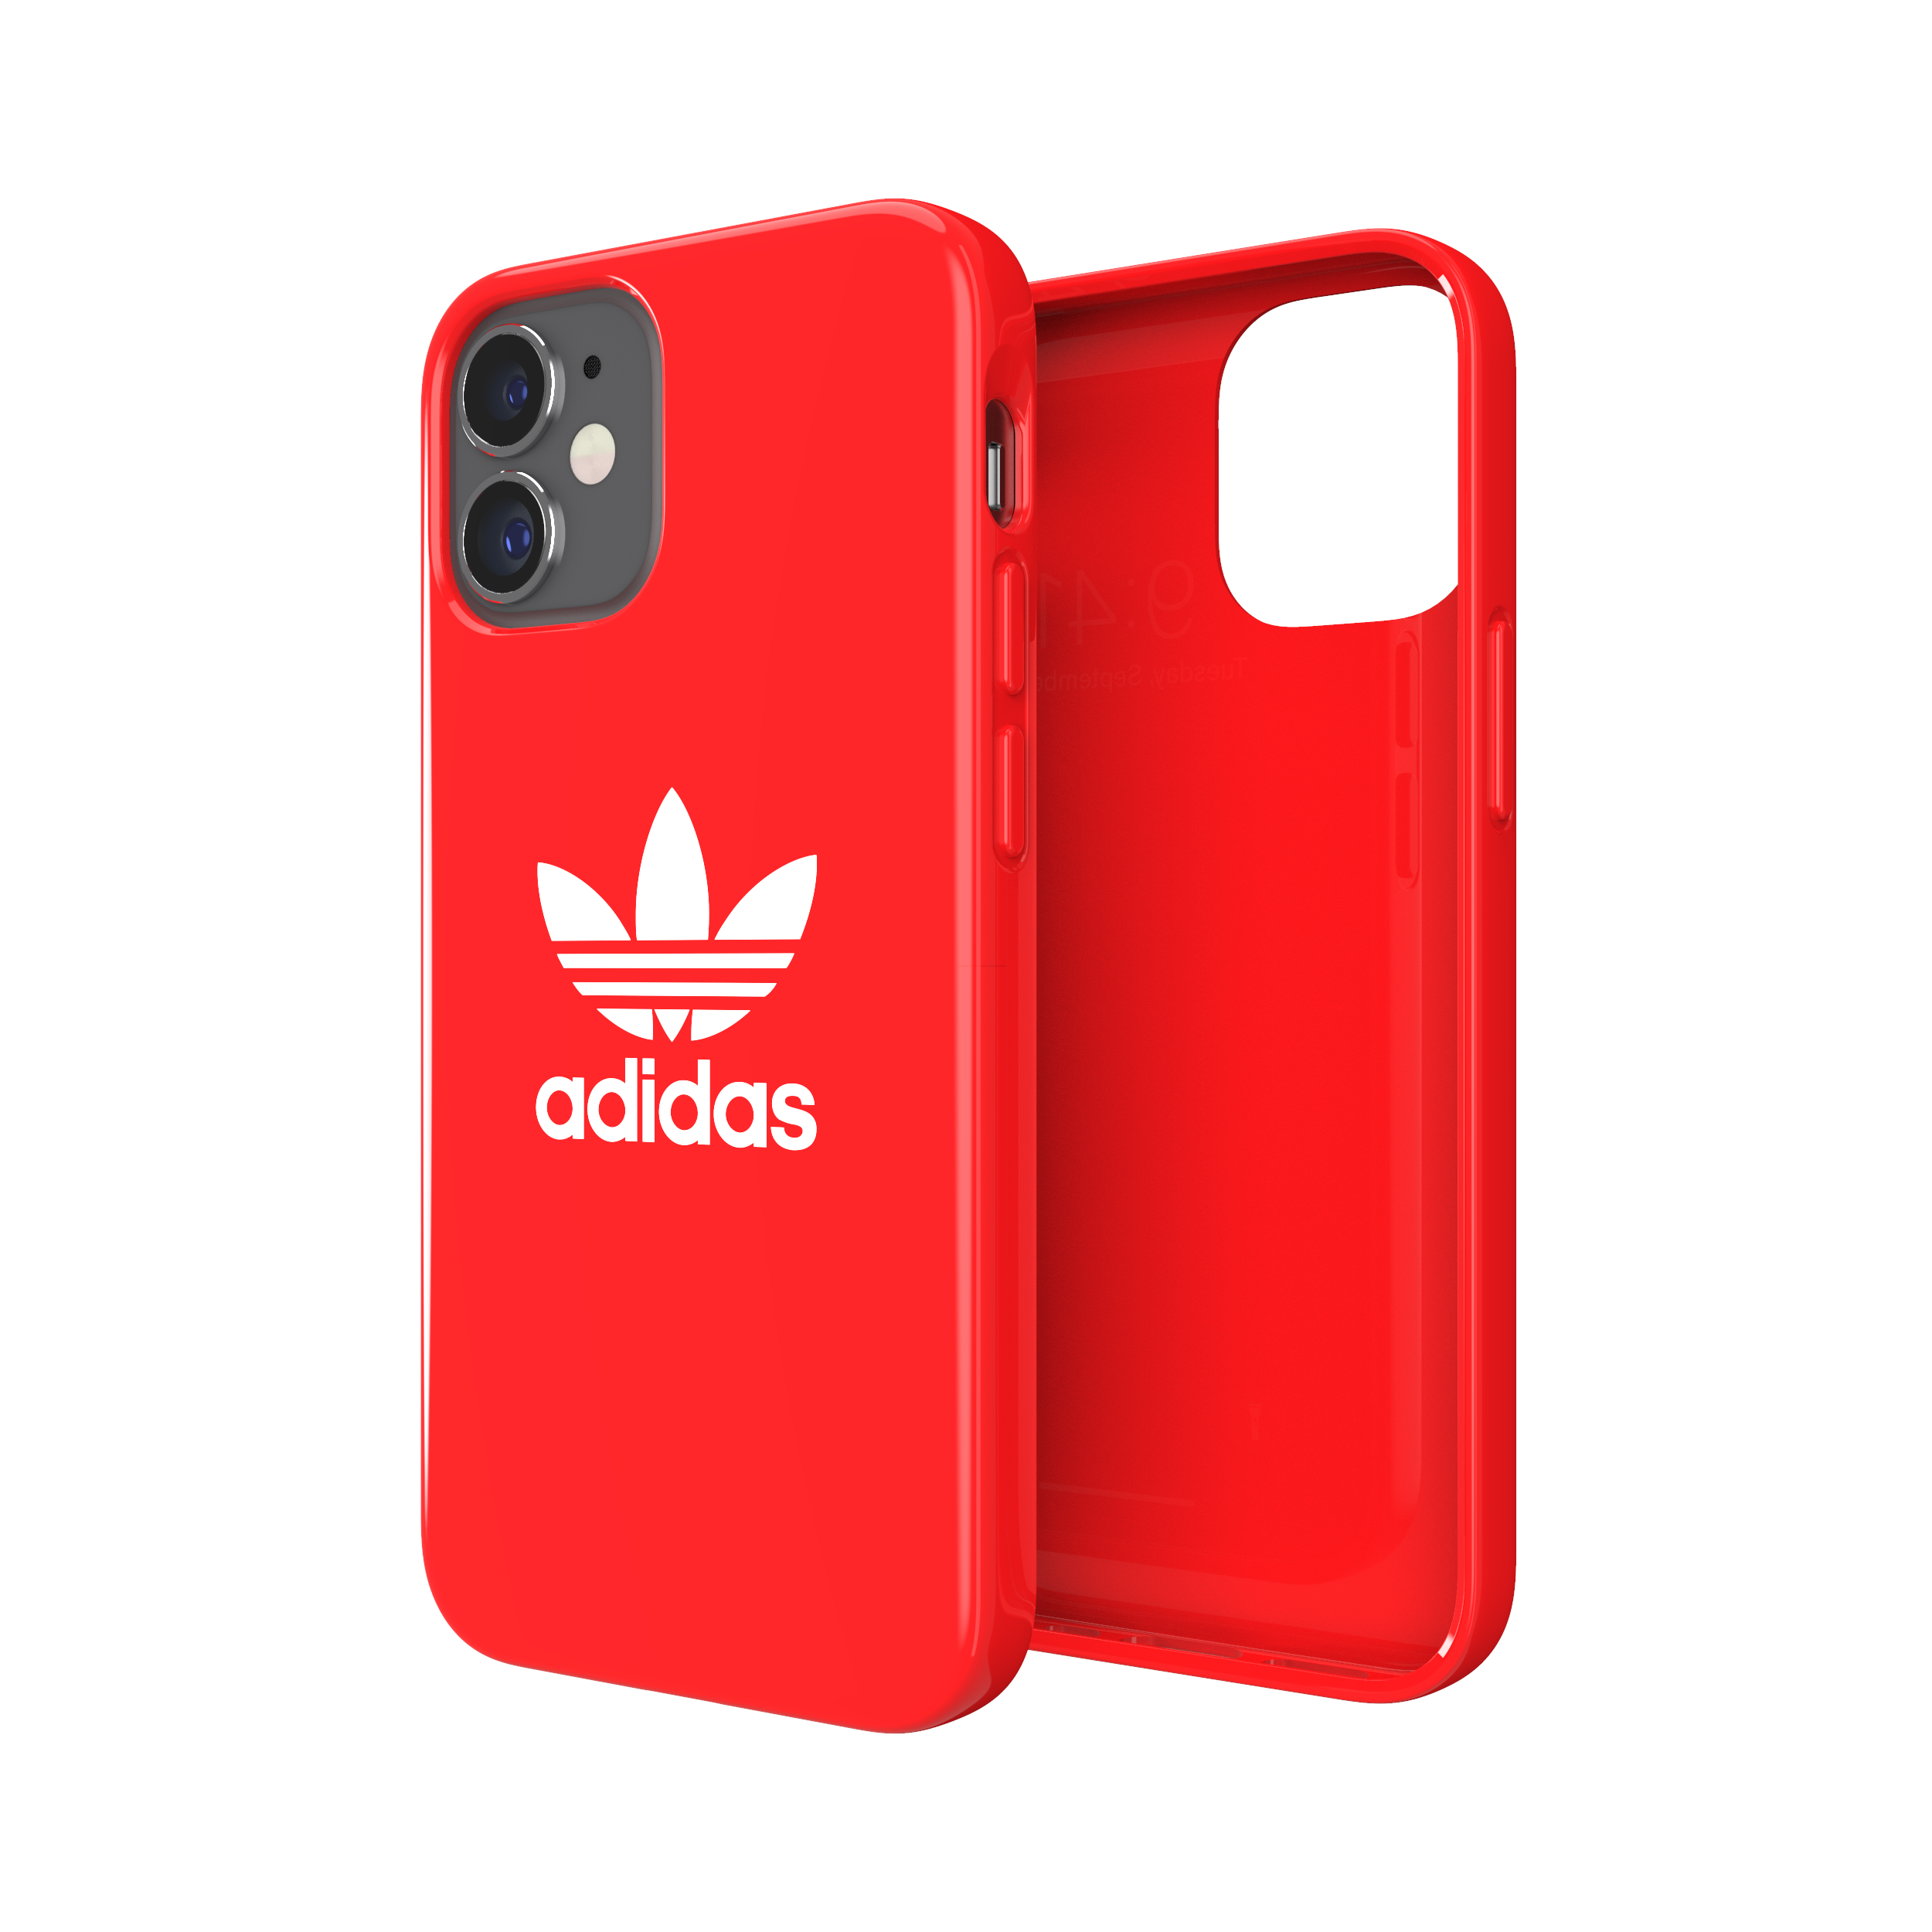 adidas SNAP Apple iPhone 12 Mini Trefoil Case - Back cover w/ Trefoil Design, Scratch & Drop Protection w/ TPU Bumper, Wireless Charging Compatible - Scarlet